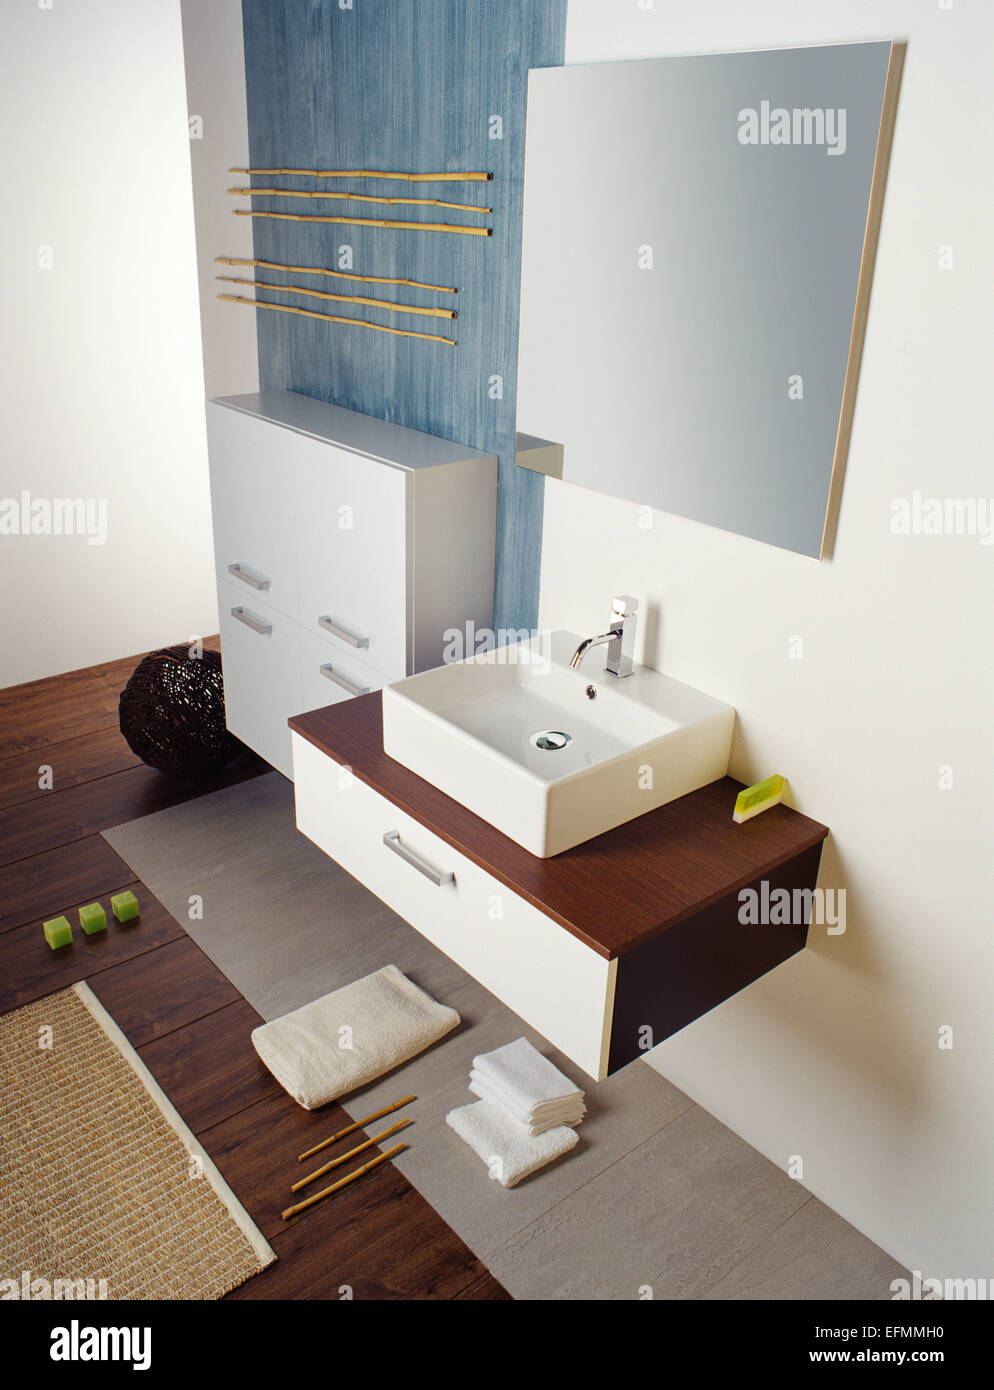 A Picture Of A Sparkling Modern Bathroom Includes Wall Mounted